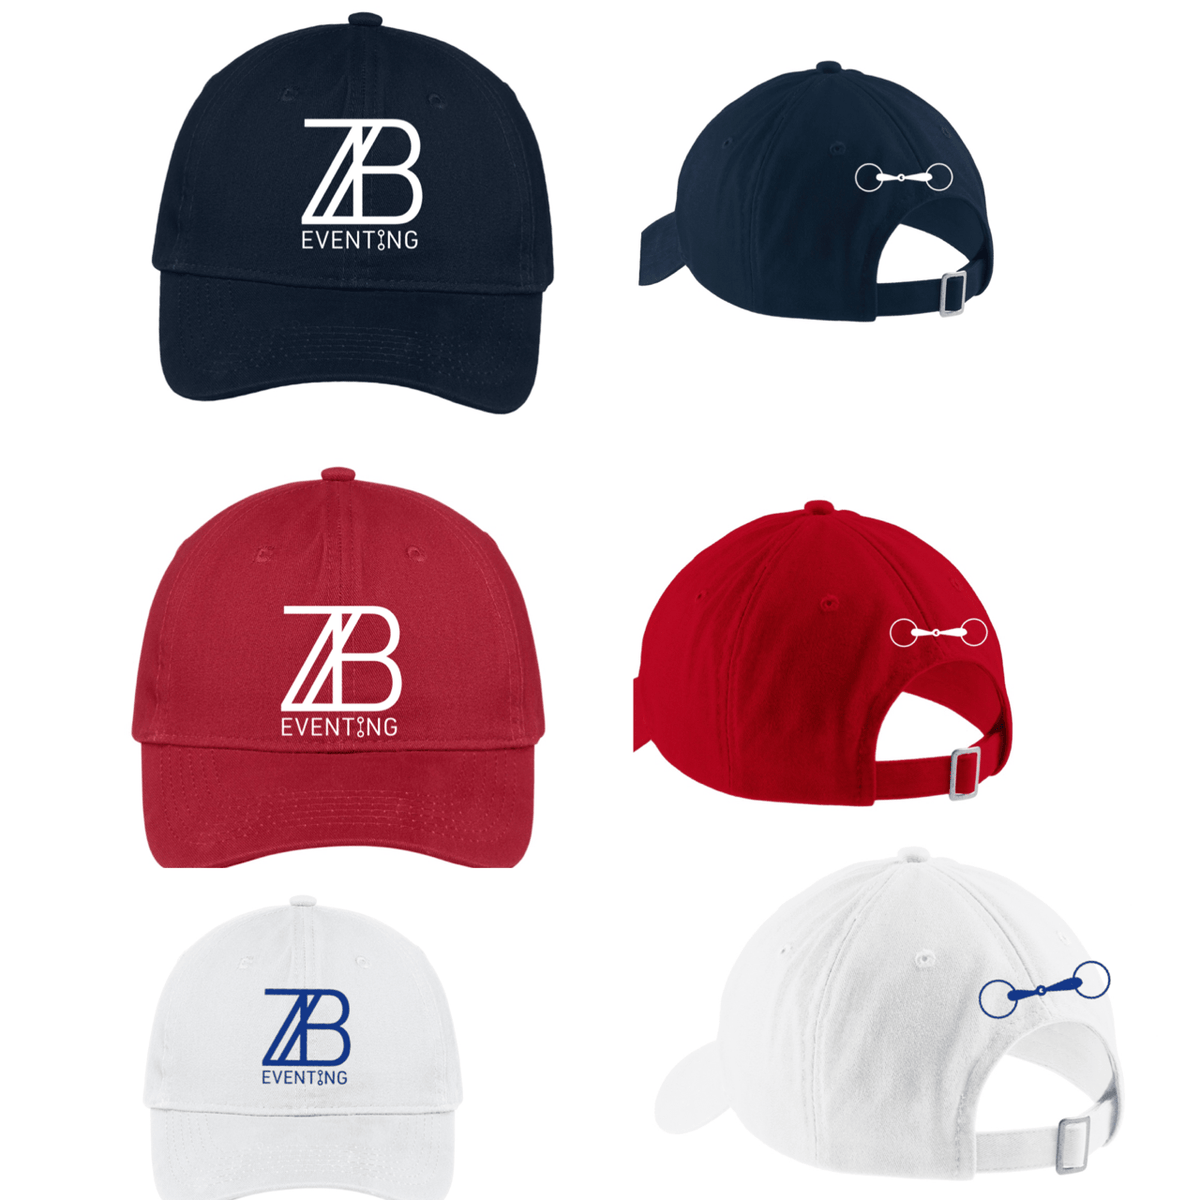 Equestrian Team Apparel Custom Team Hats ZB Eventing Hats equestrian team apparel online tack store mobile tack store custom farm apparel custom show stable clothing equestrian lifestyle horse show clothing riding clothes horses equestrian tack store